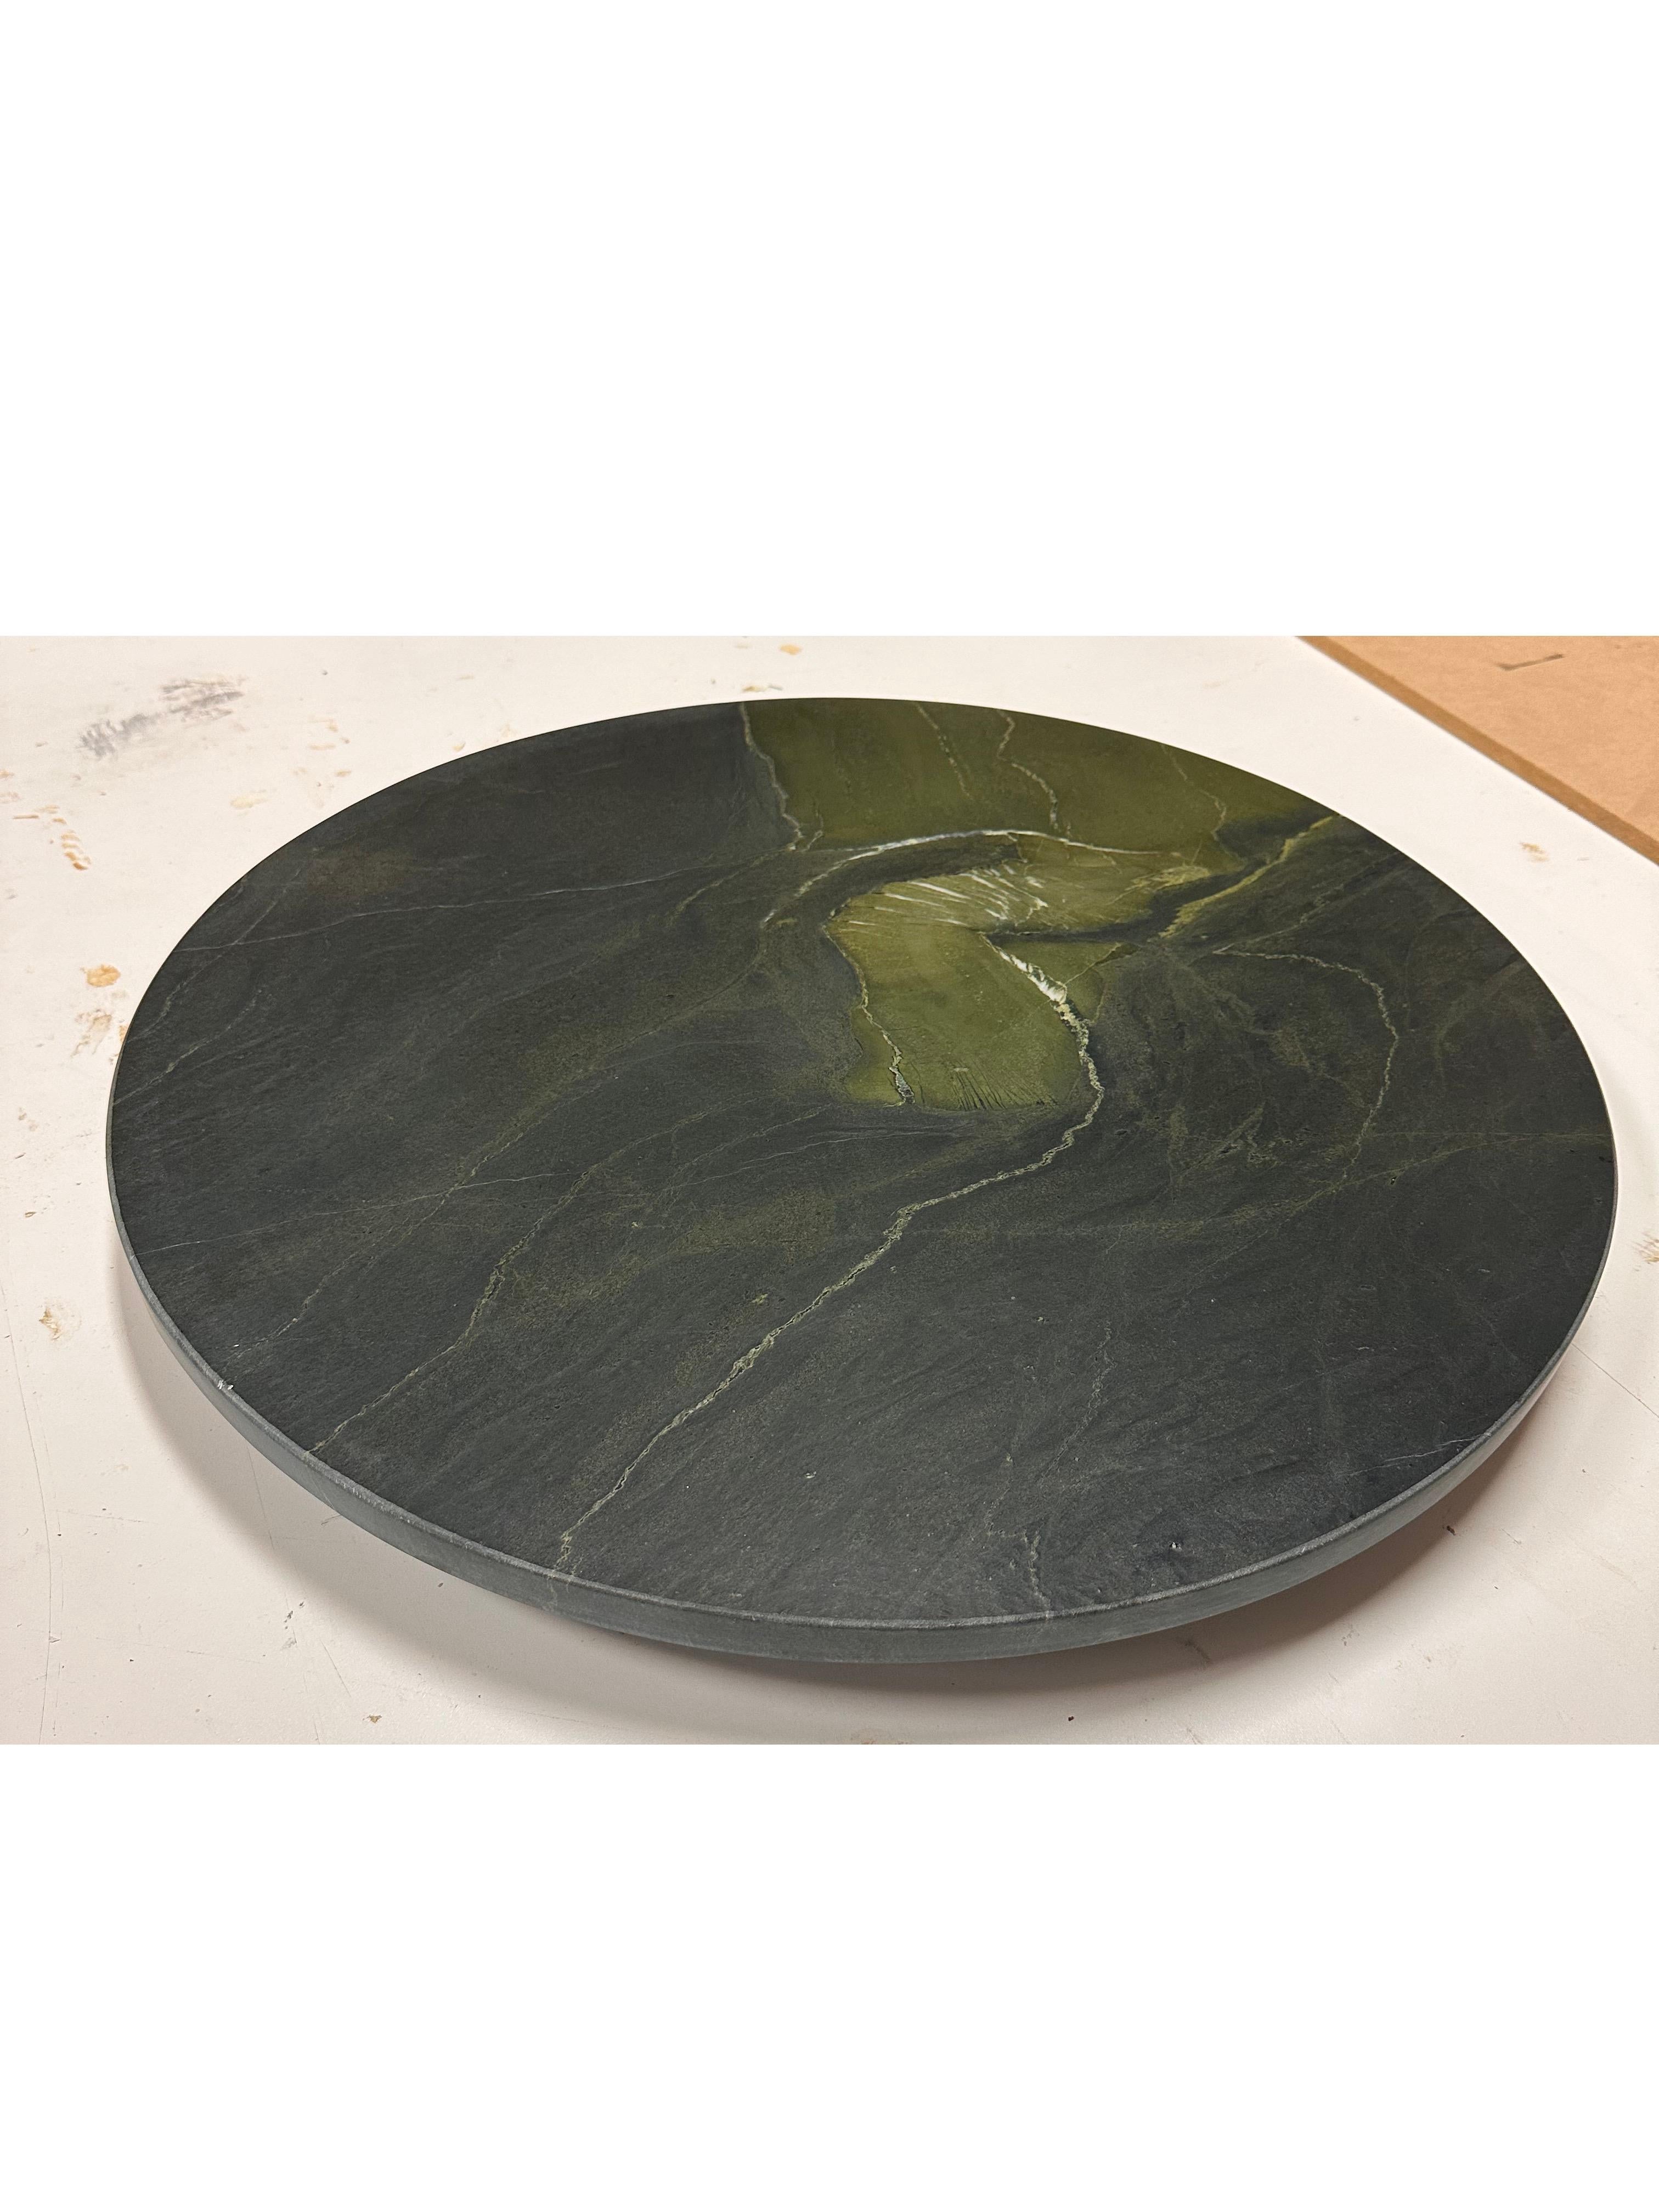 Designed to be the perfect, round functional accent to any table, our Lazy Susan is available as a solid wood or marble-topped piece. The image shown is fabricated in a dramatic Avocatus Quartzite Top with a leathered finish and a  blackened oak